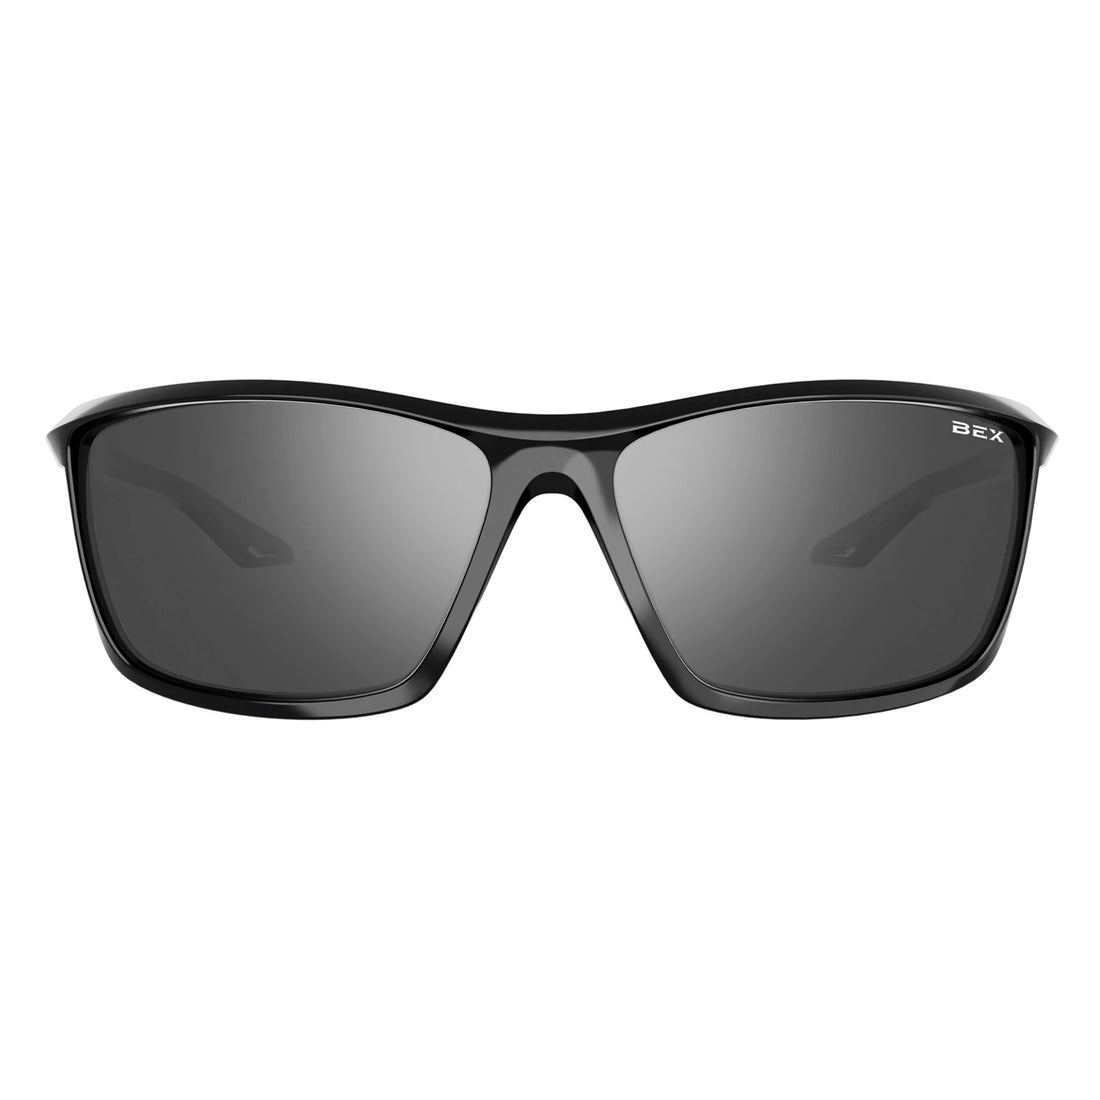 Sonar in Black/Silver view of front